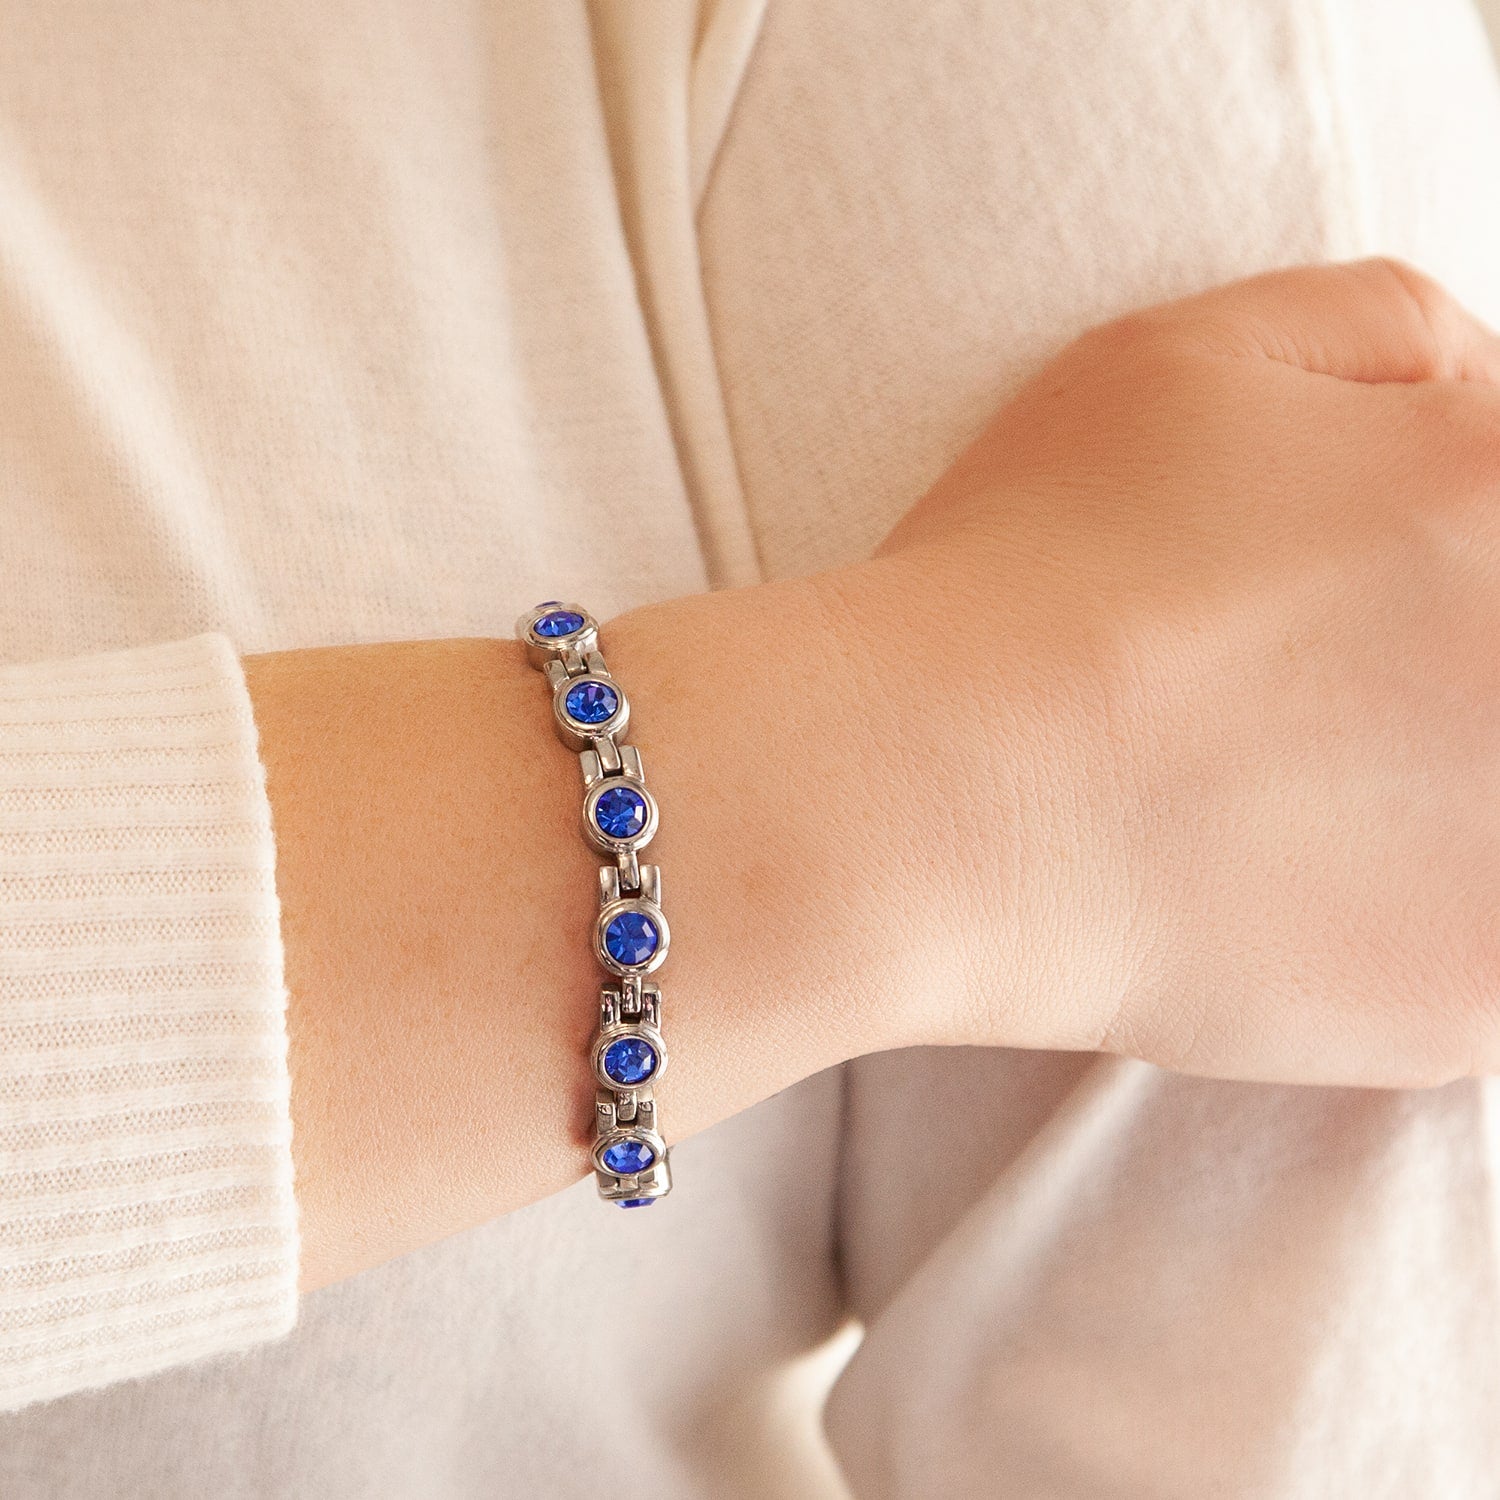 Capri - Negative Ion Bracelet, Polished Stainless Steel with Blue Crystals